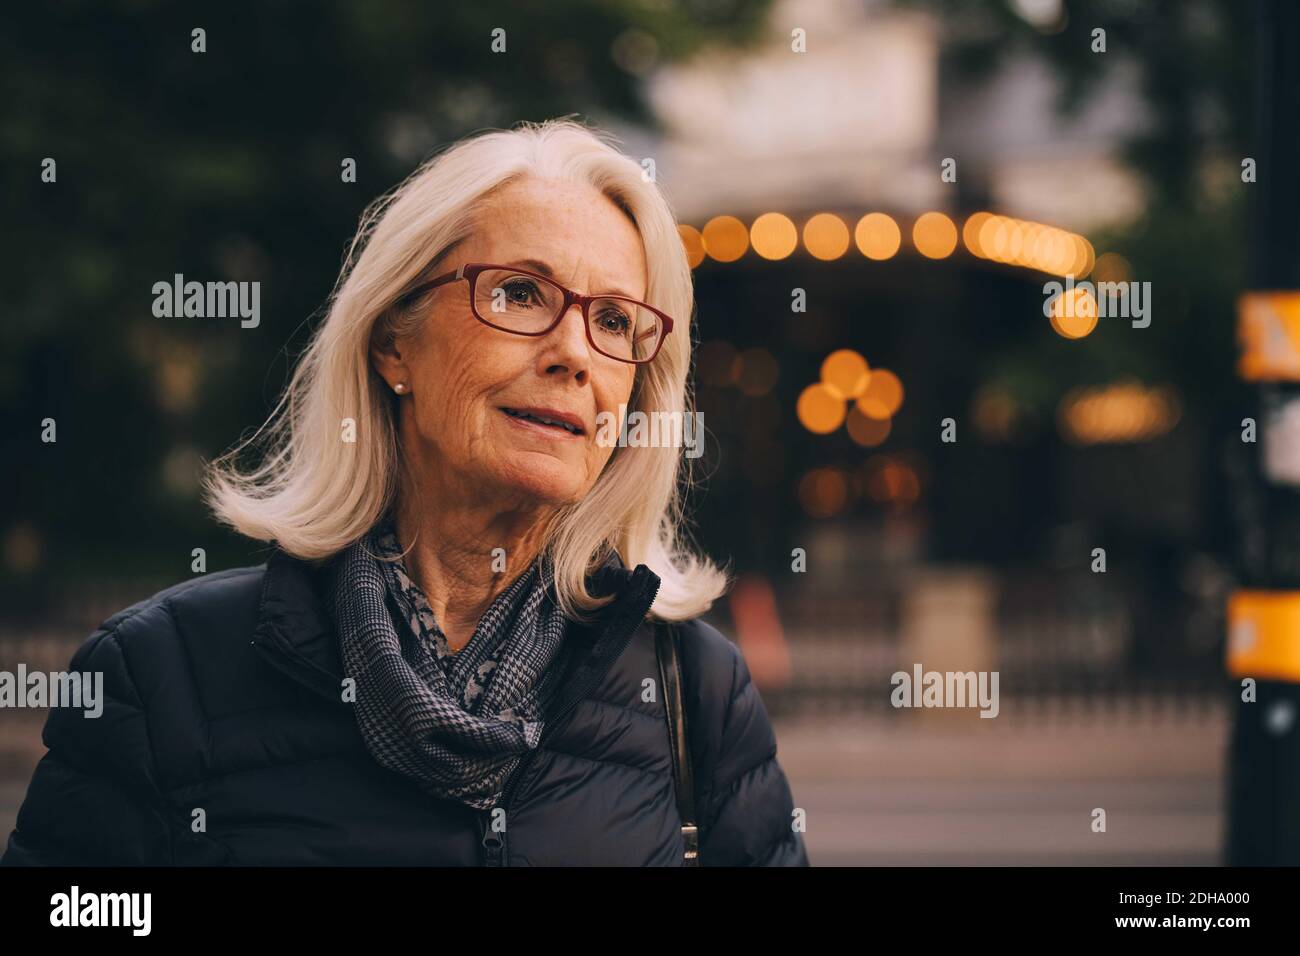 Senior woman looking away while standing in city Stock Photo